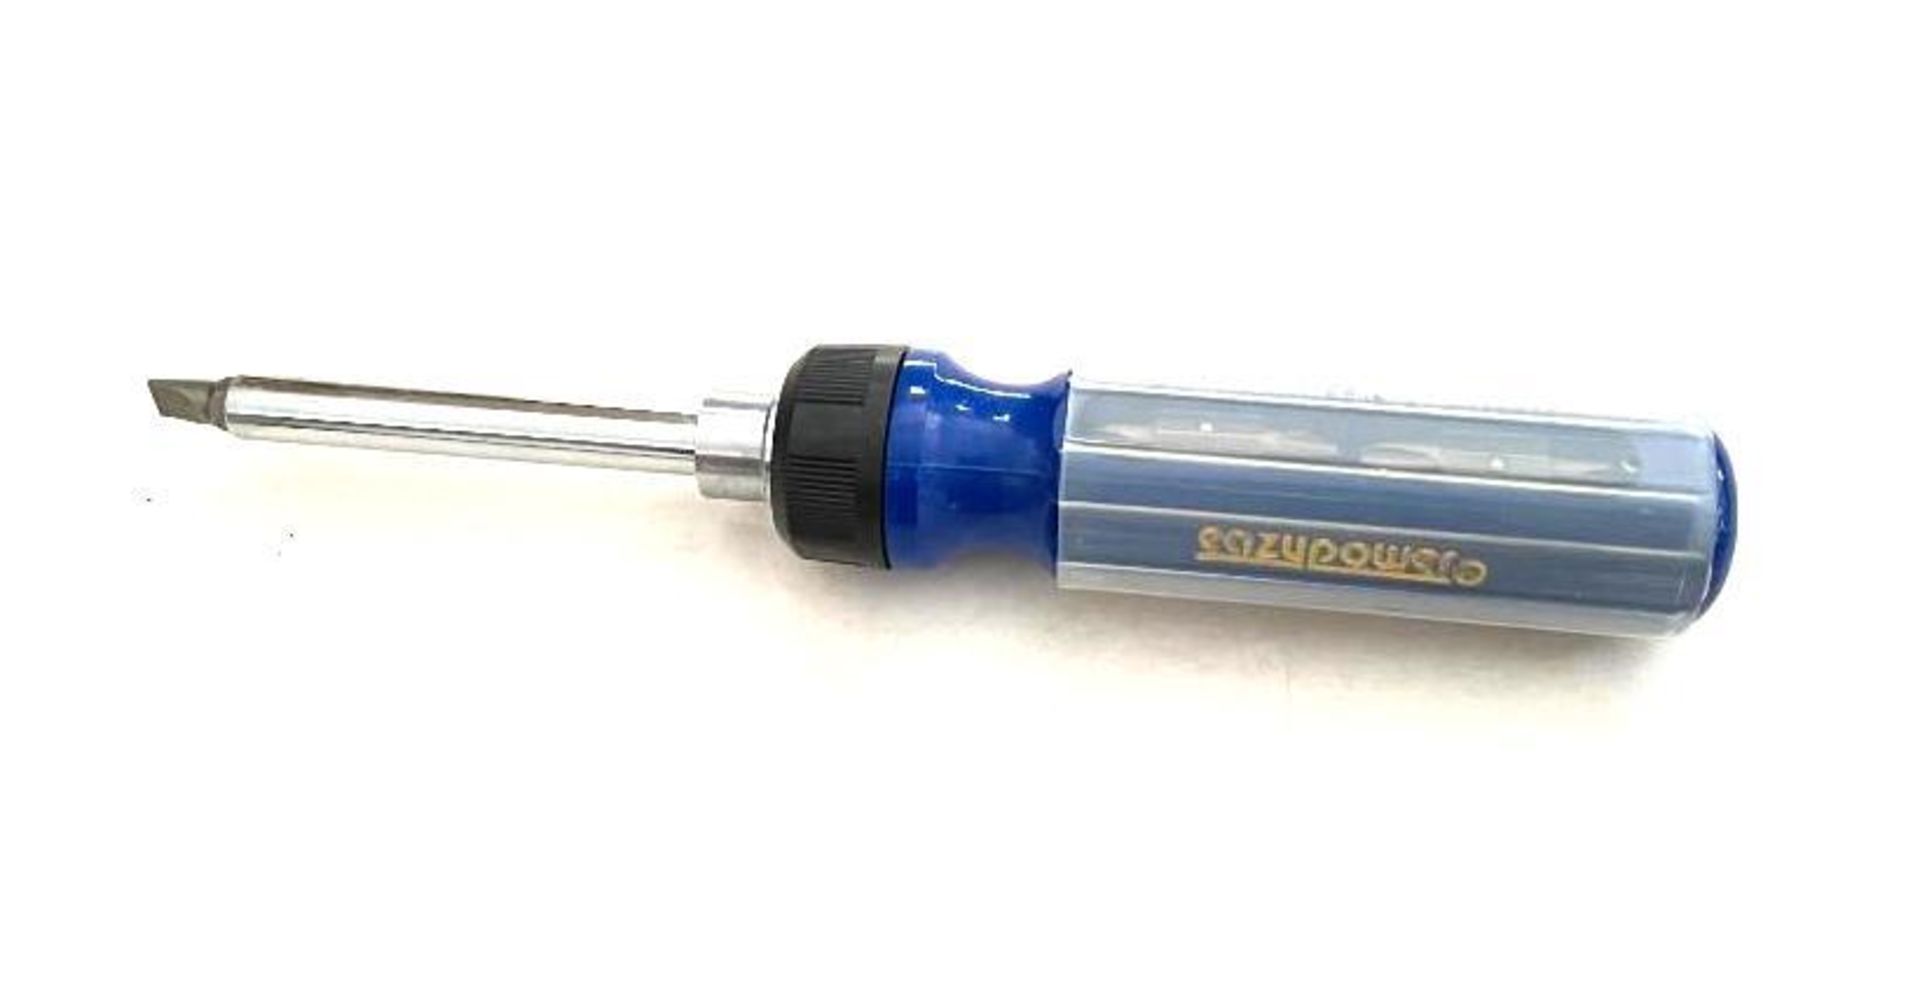 300CT 25-IN-1 RATCHETING SCREWDRIVERS BRAND/MODEL EAZYPOWER 88065 ADDITIONAL INFO TOTAL LOT RETAIL P